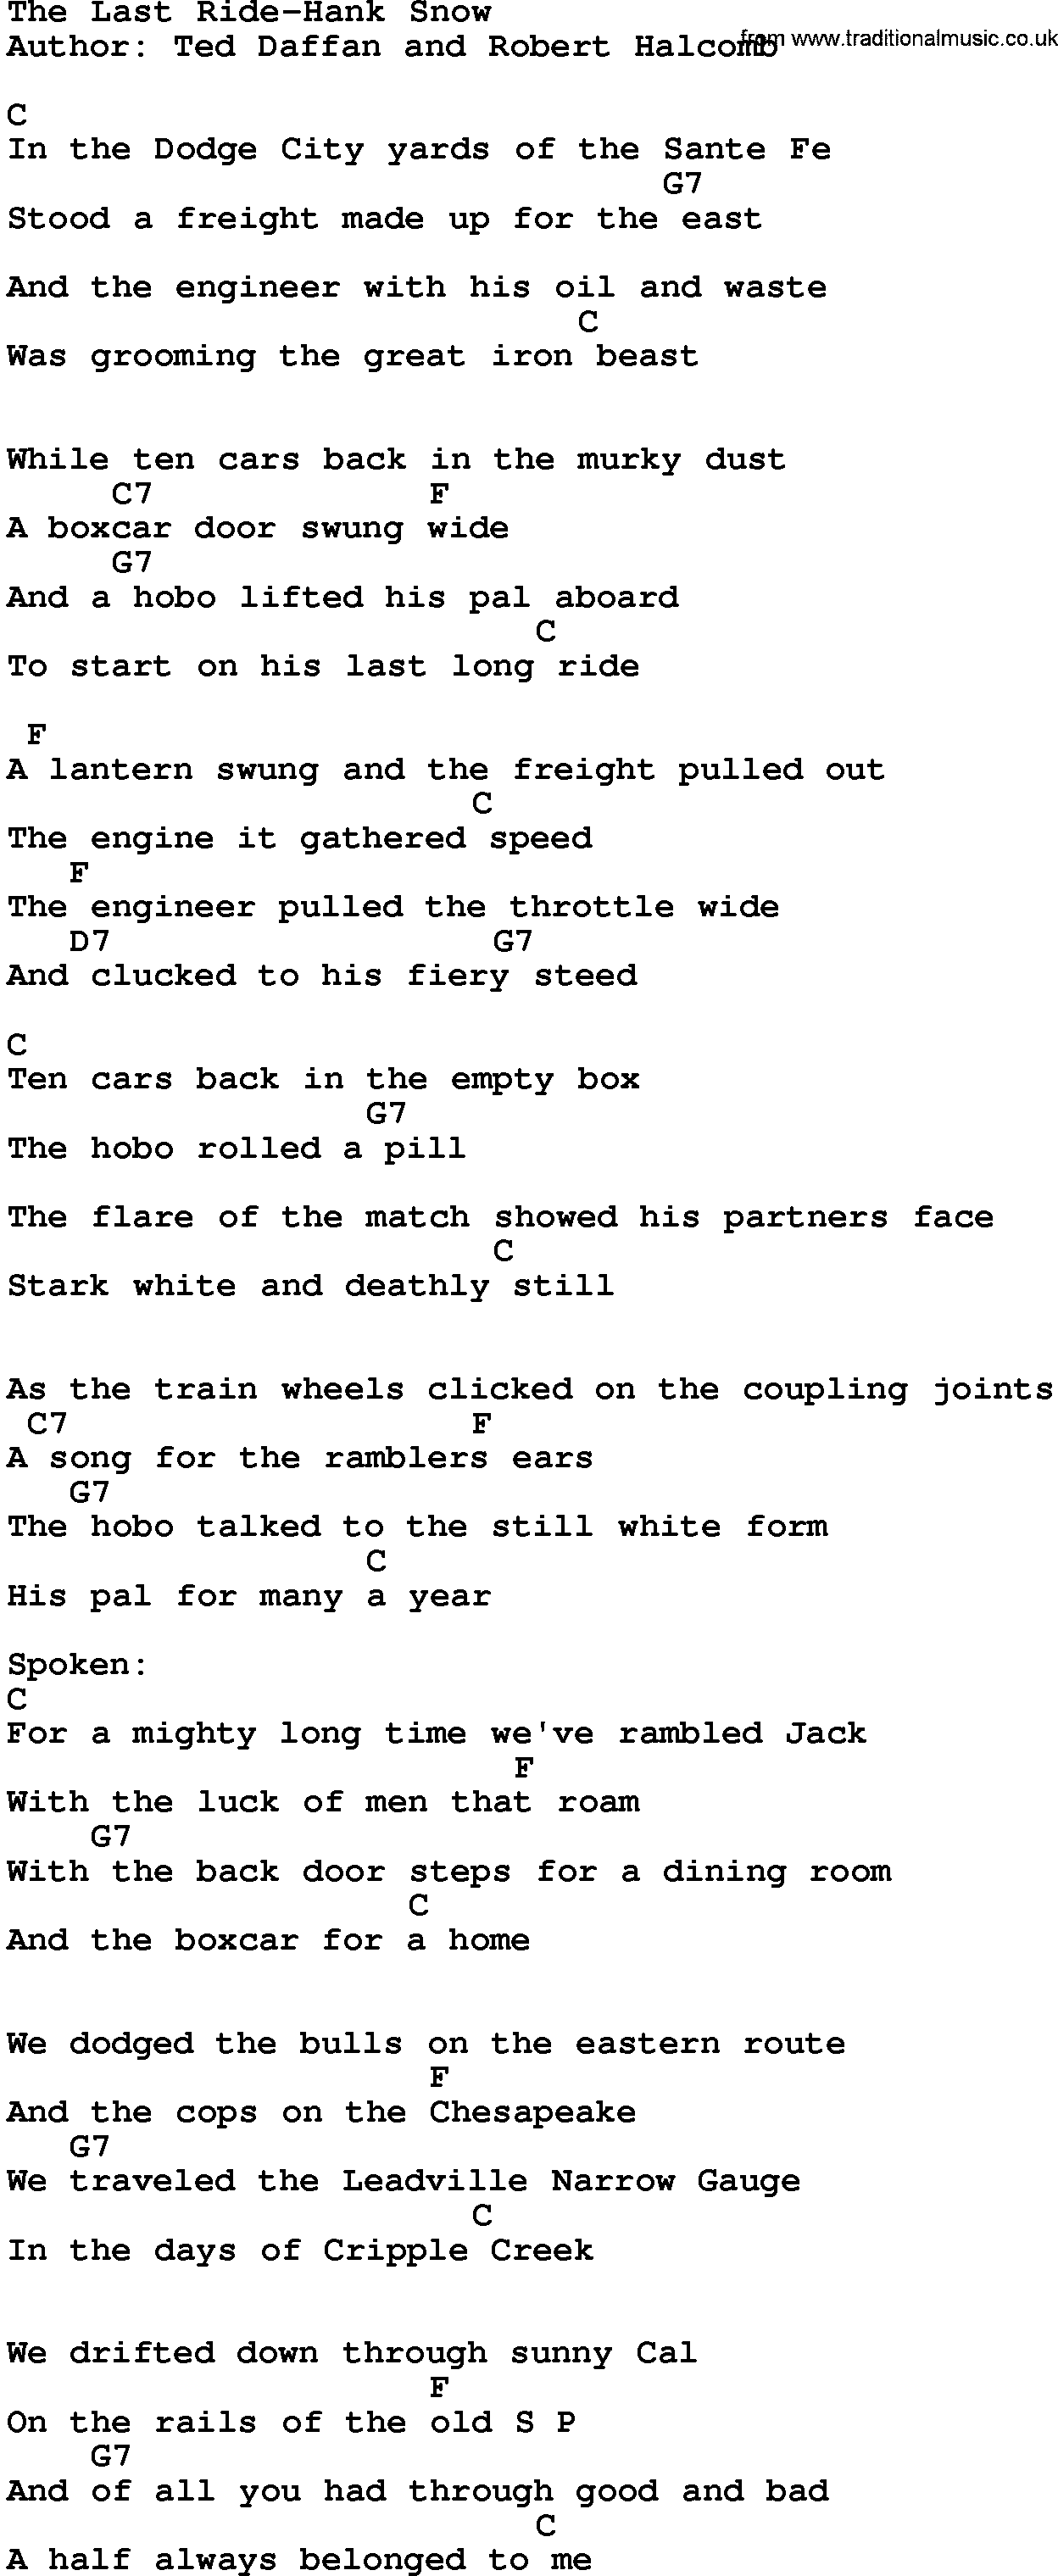 Country music song: The Last Ride-Hank Snow lyrics and chords